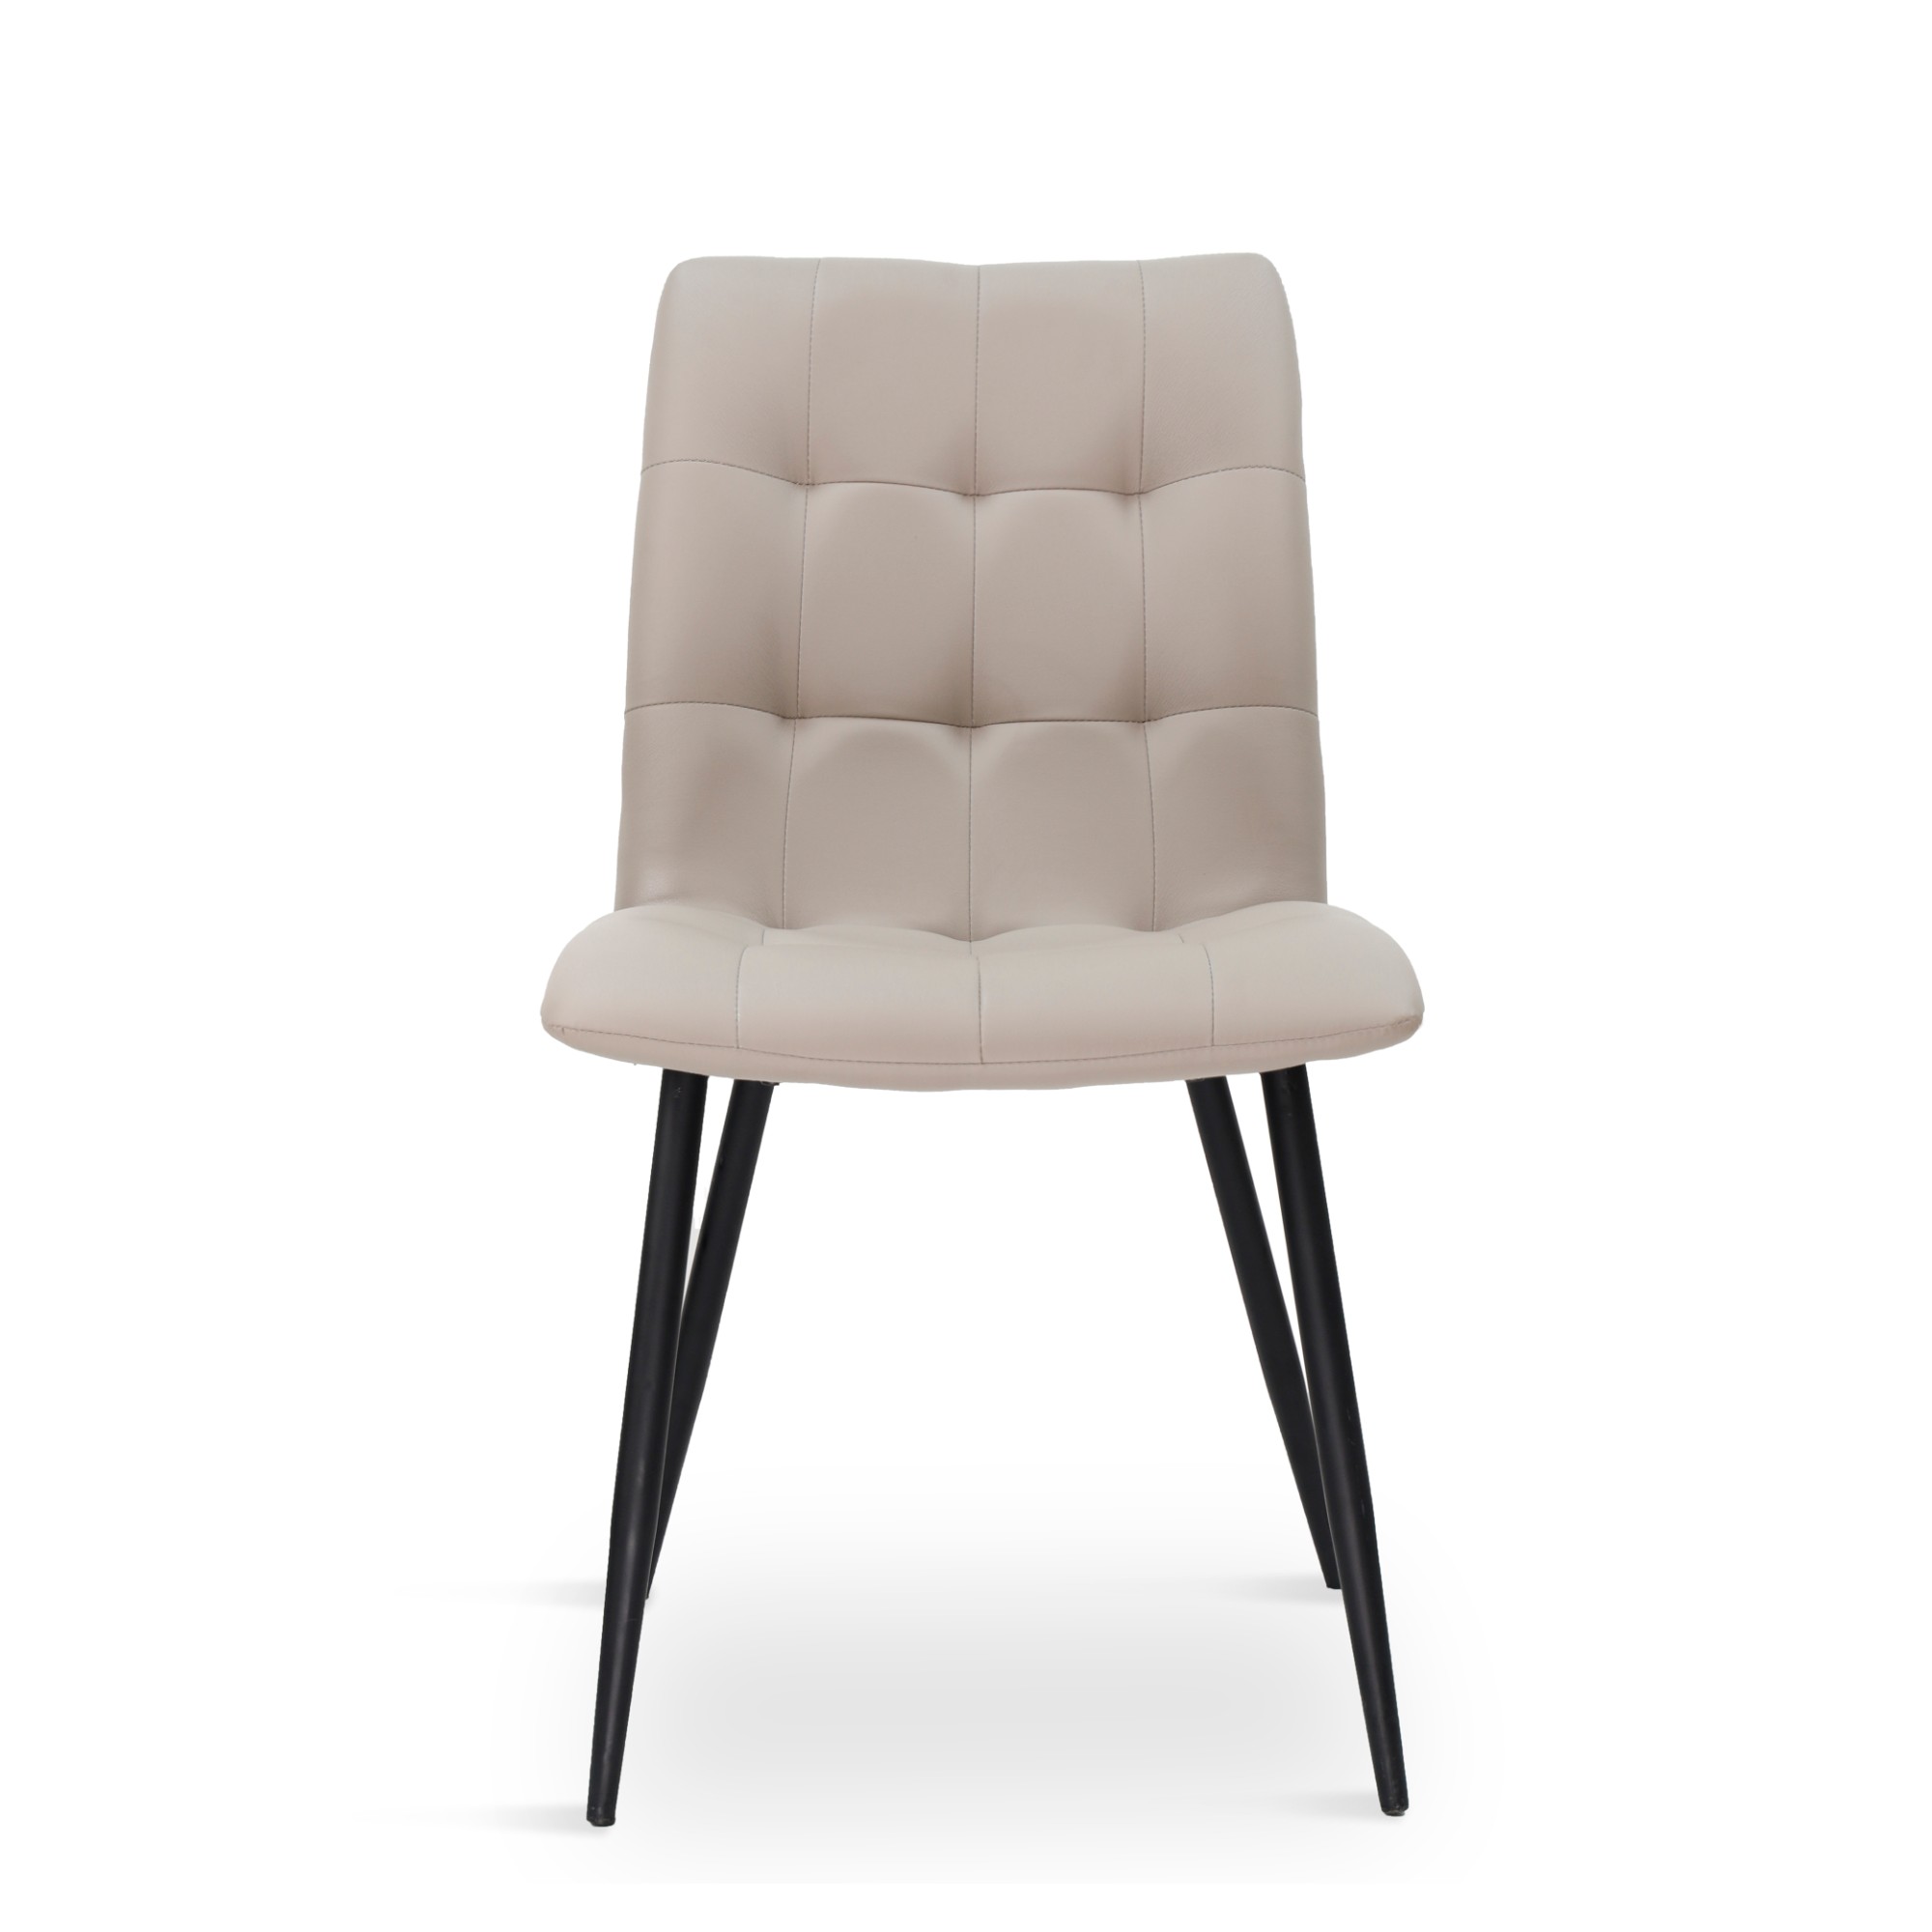 Modern Elegant Button-Tufted Upholstered Fabric With Dining Side Chair